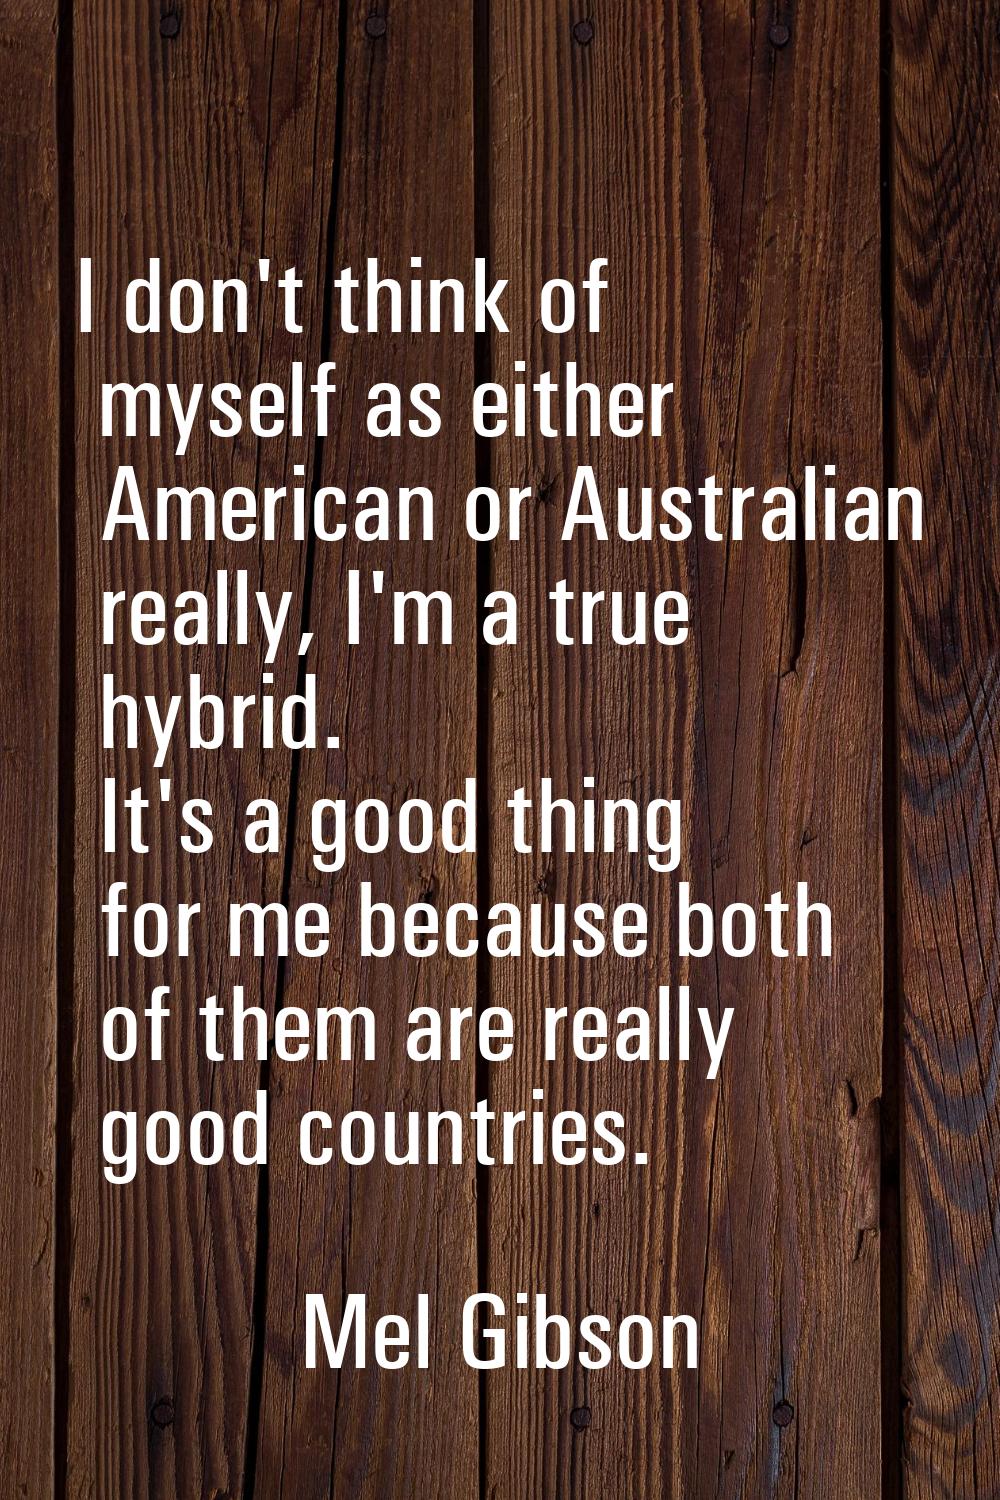 I don't think of myself as either American or Australian really, I'm a true hybrid. It's a good thi